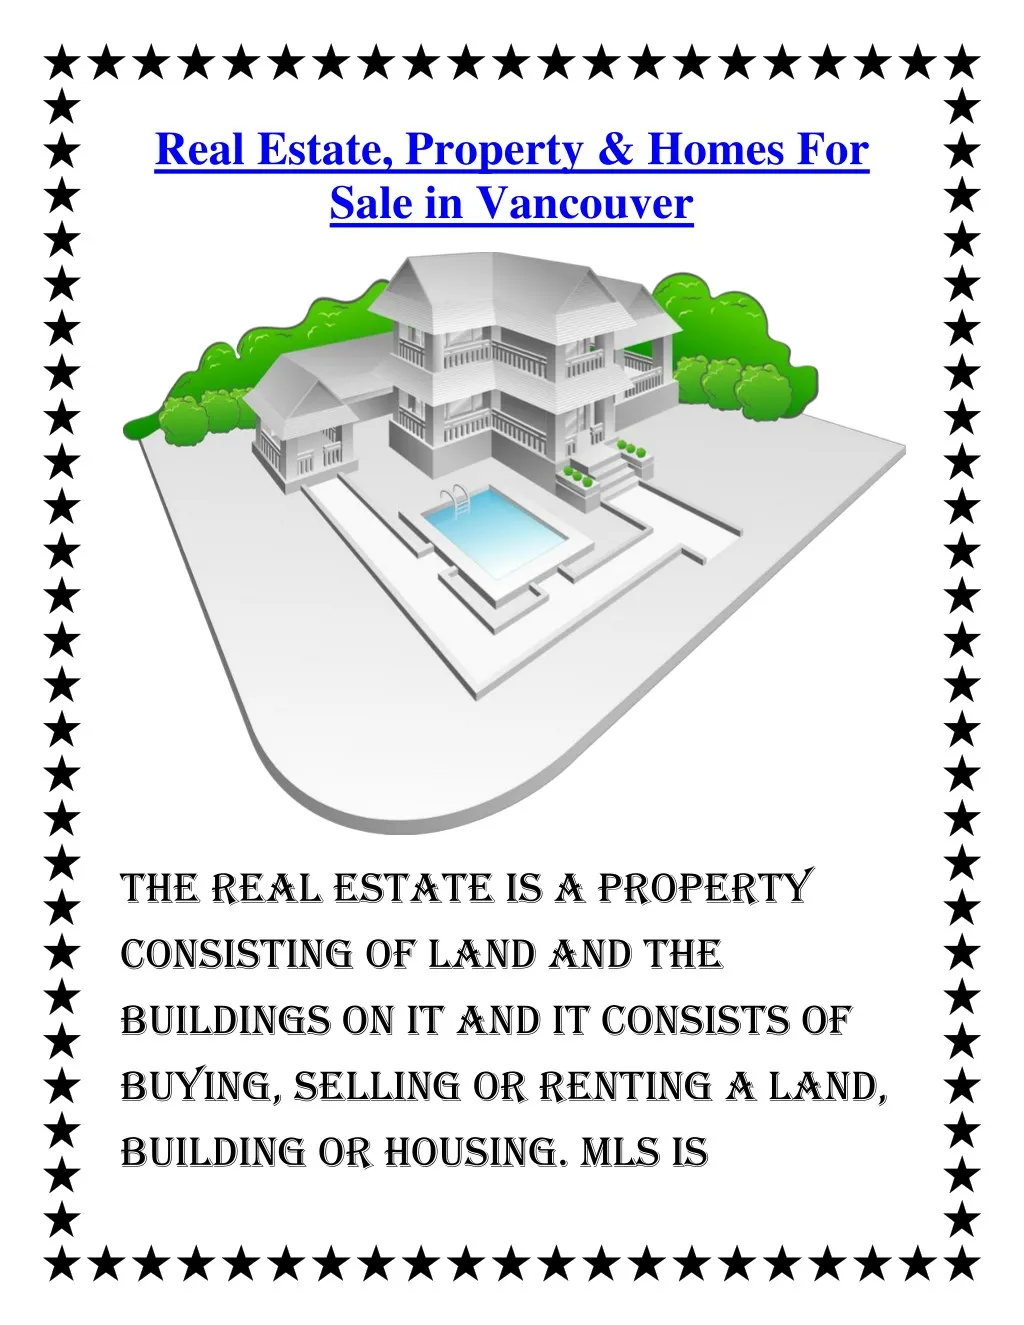 real estate property homes for sale in vancouver